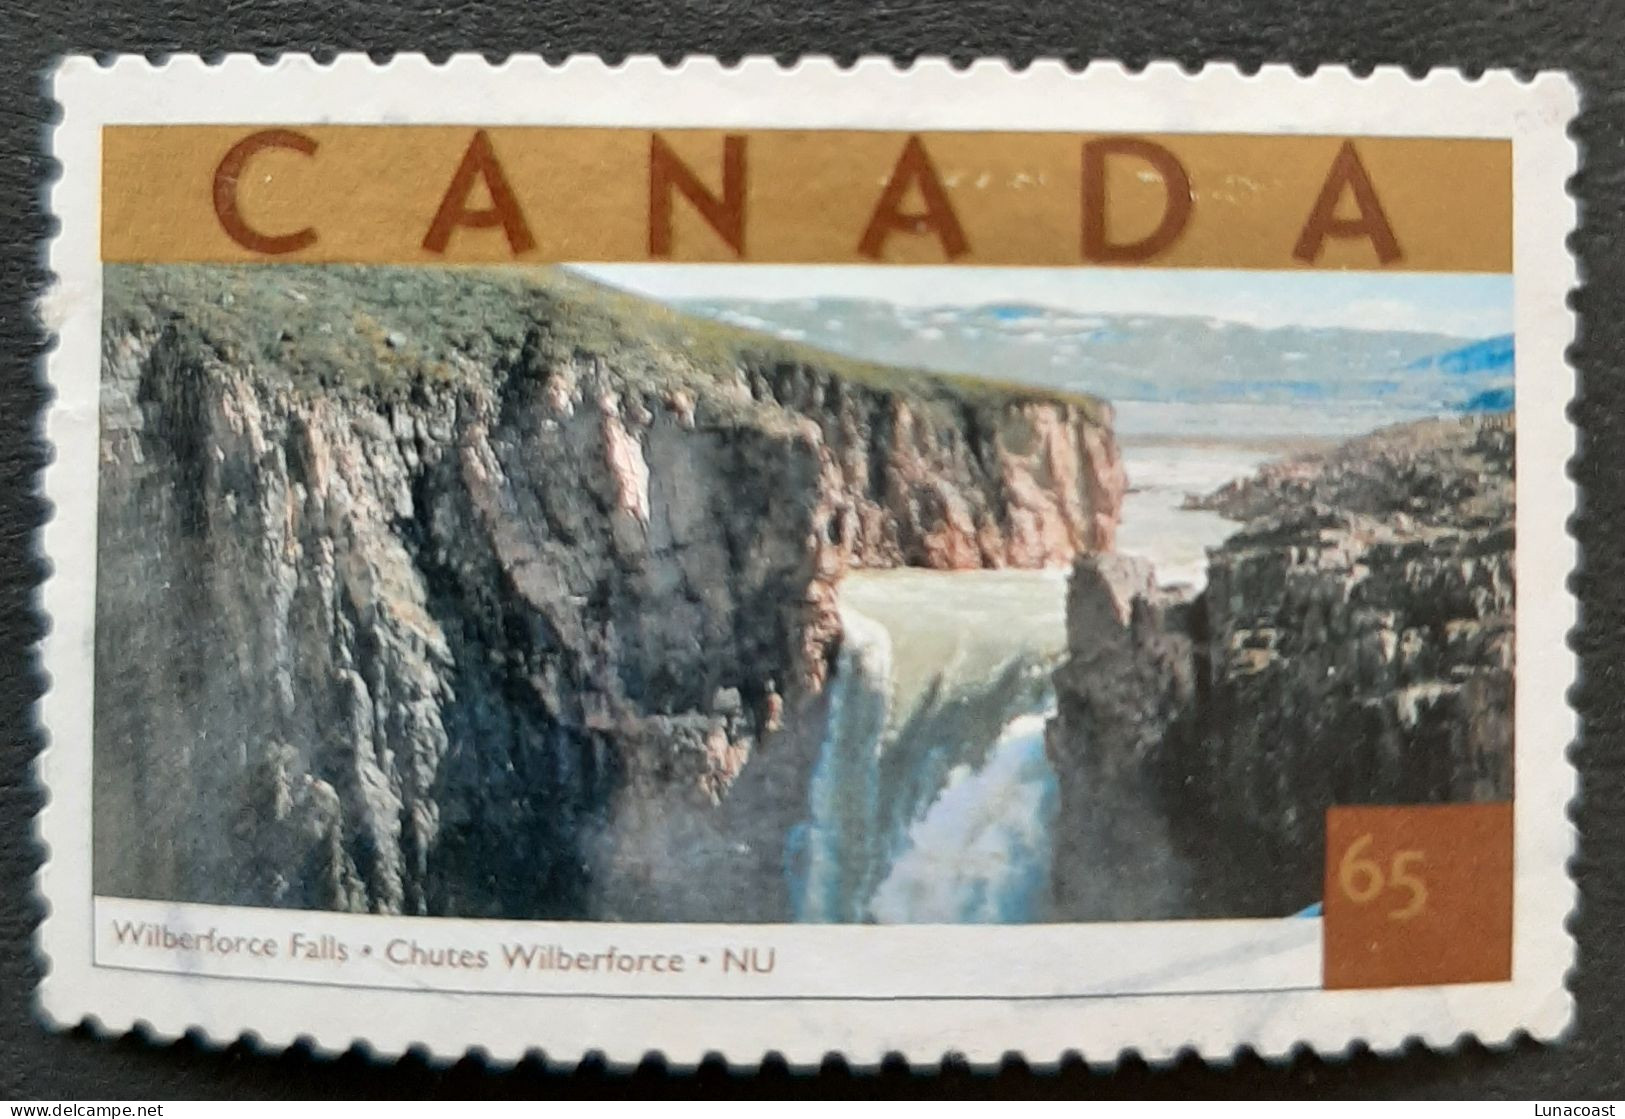 Canada 2003  USED  Sc1989a   65c  Tourist Attractions, Wilberforce Falls - Used Stamps